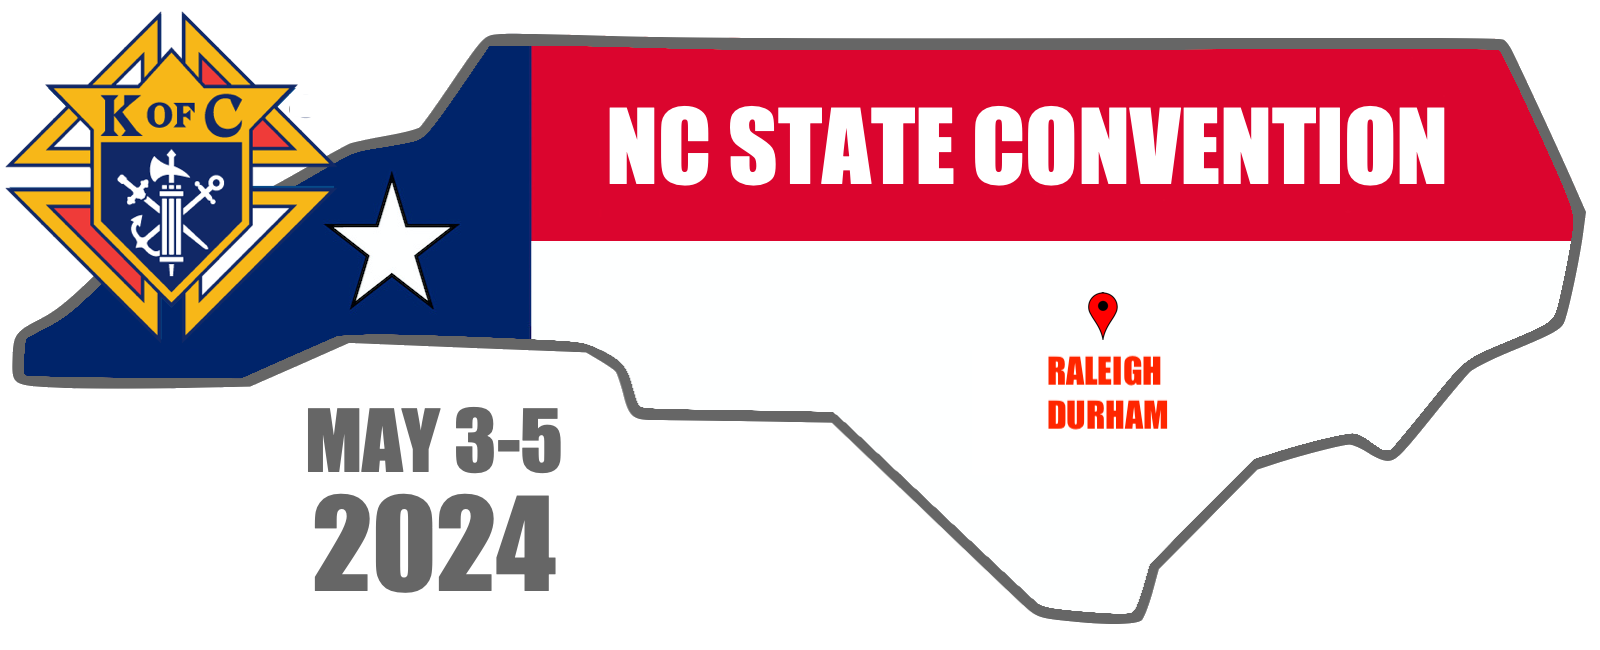 Convention_Graphic_2024-1600x650-new_logo-RDU.png